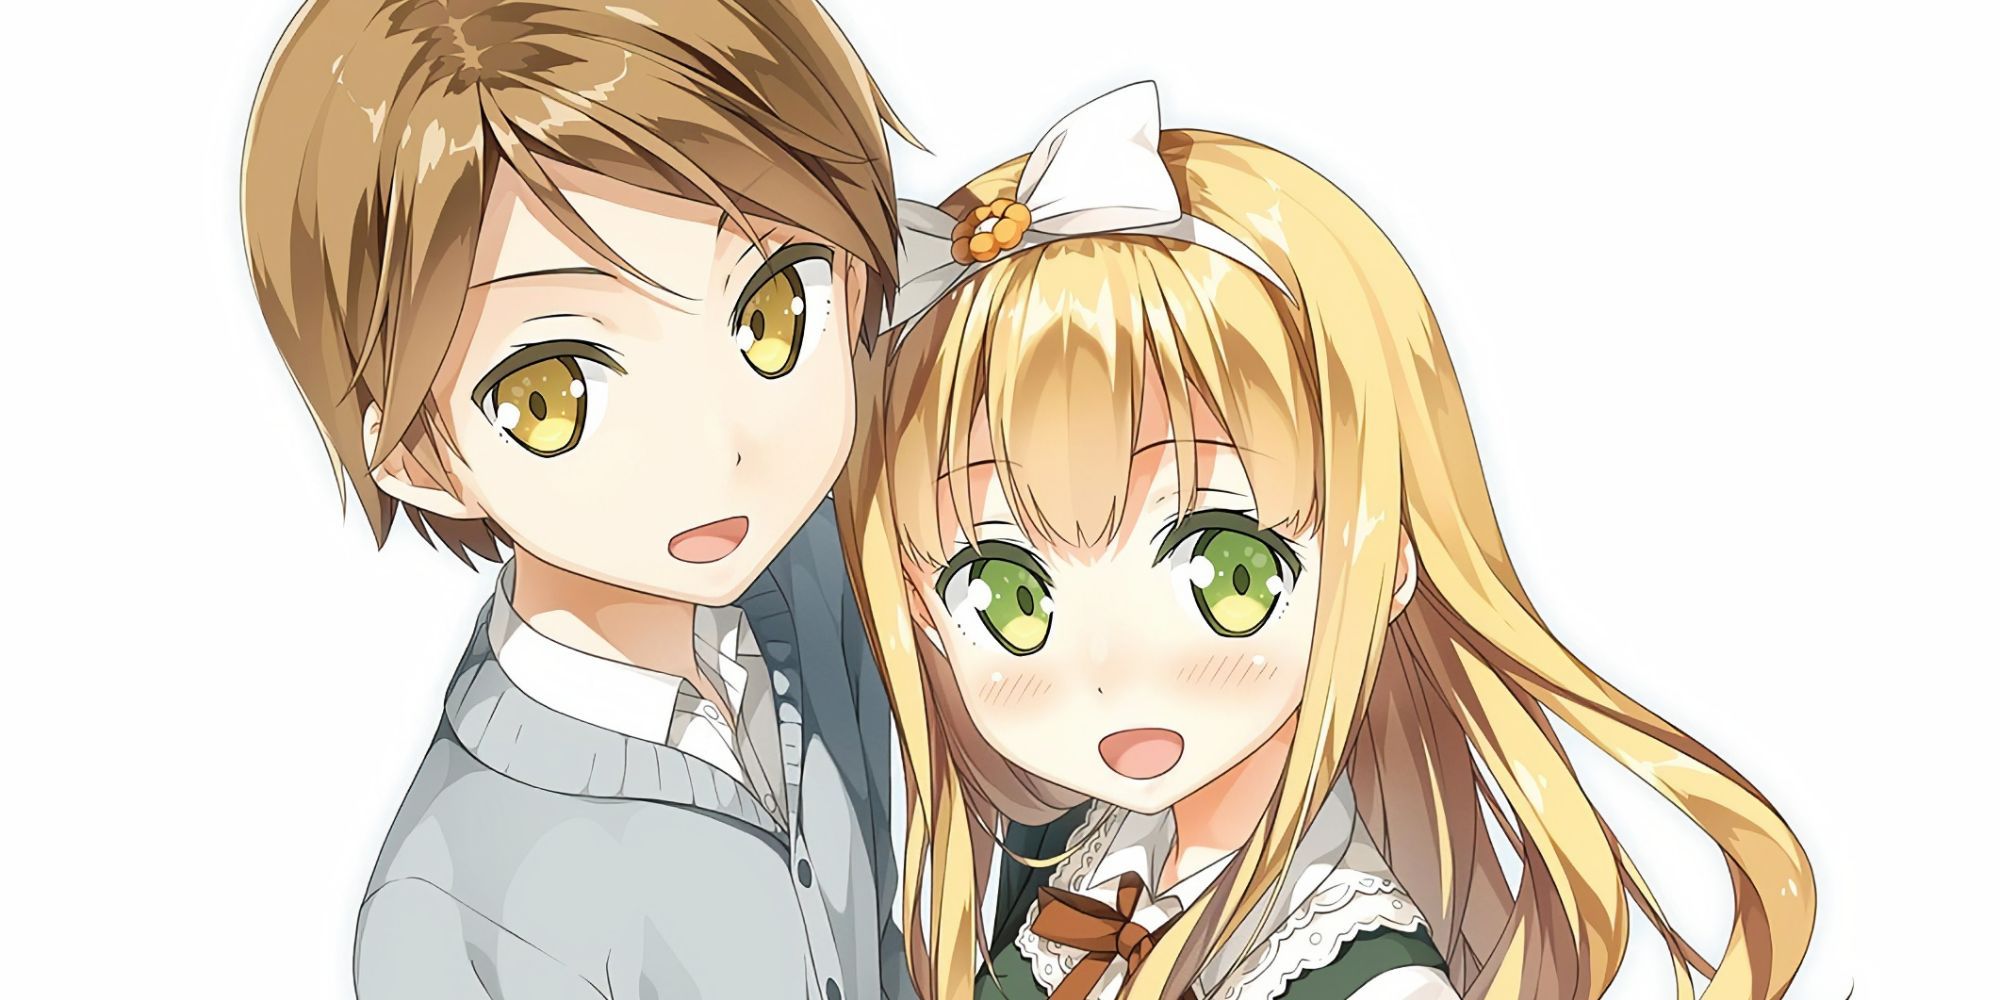 Close-up of two characters from Henneko anime